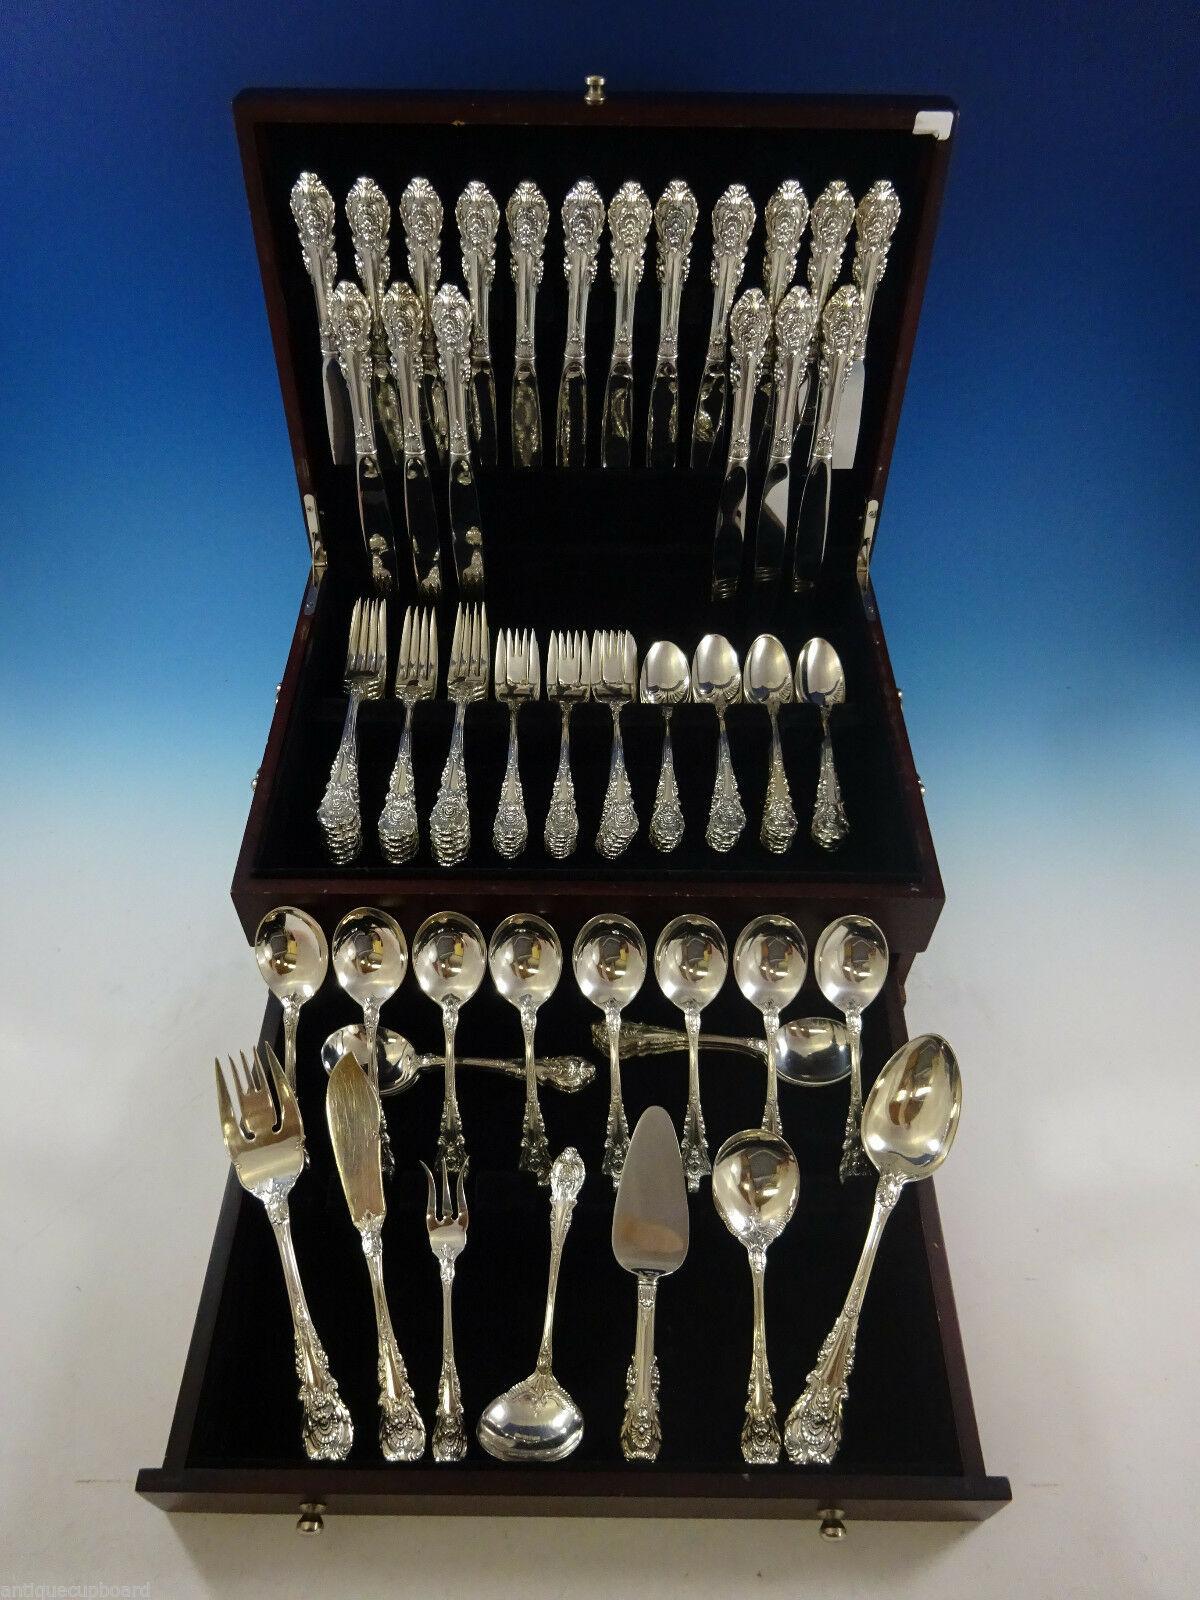 Outstanding Sir Christopher by Wallace sterling silver flatware set - 97 Pieces. This set includes:

18 knives, 9 1/8